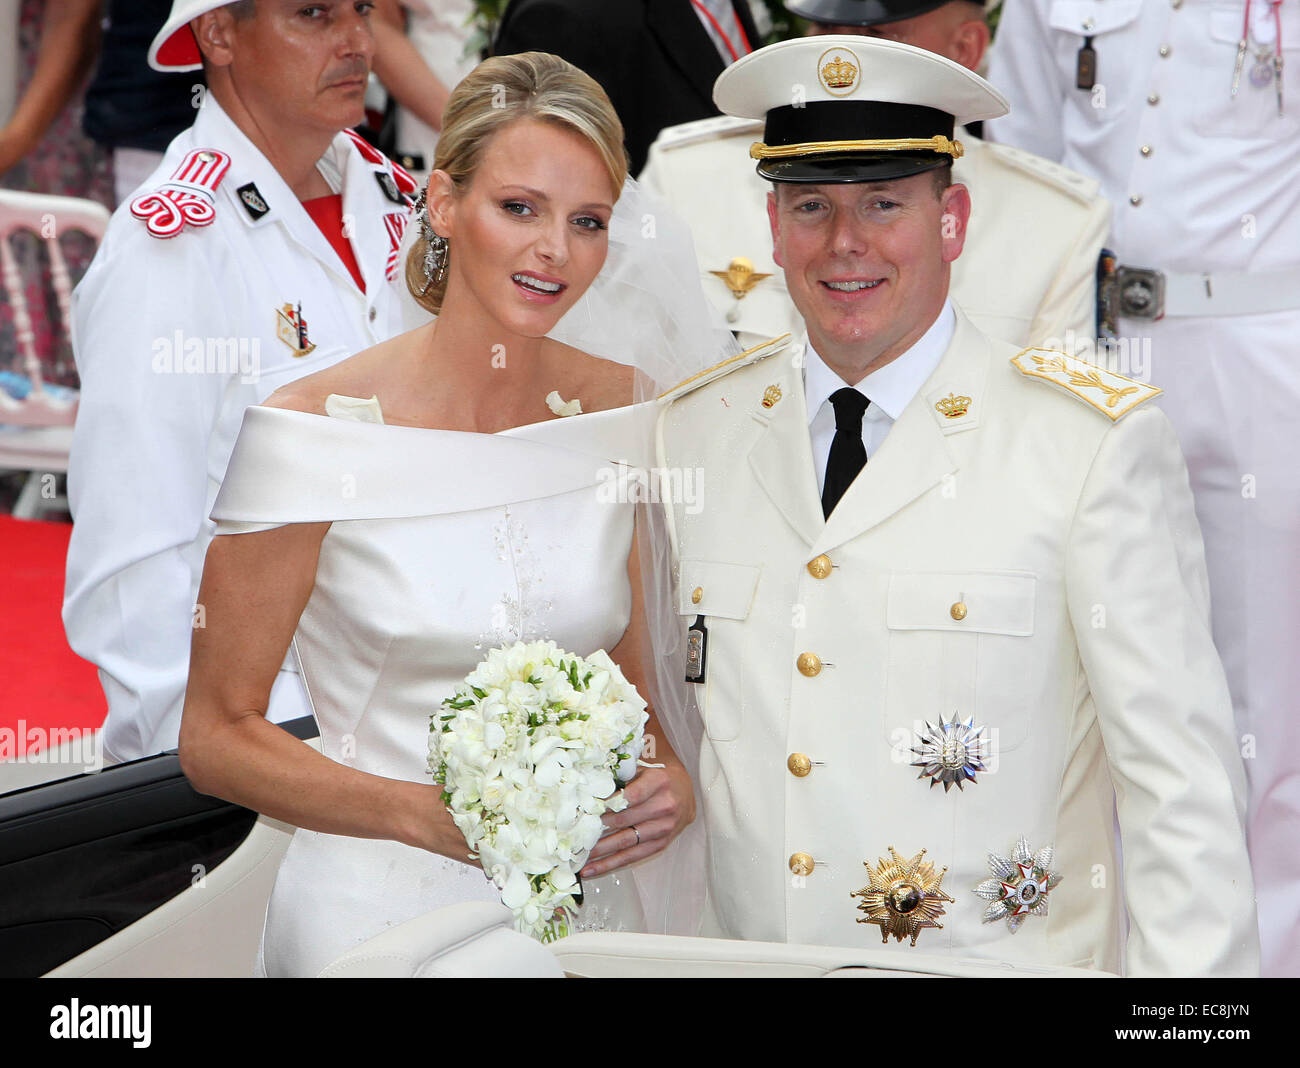 Prince Albert II and Princess Charlene leave after the religious wedding in the Prince's Palace in Monaco, 02 July 2011. The ceremony took place in the Main Courtyard of the Prince's Palace. Photo: Albert Nieboer Stock Photo